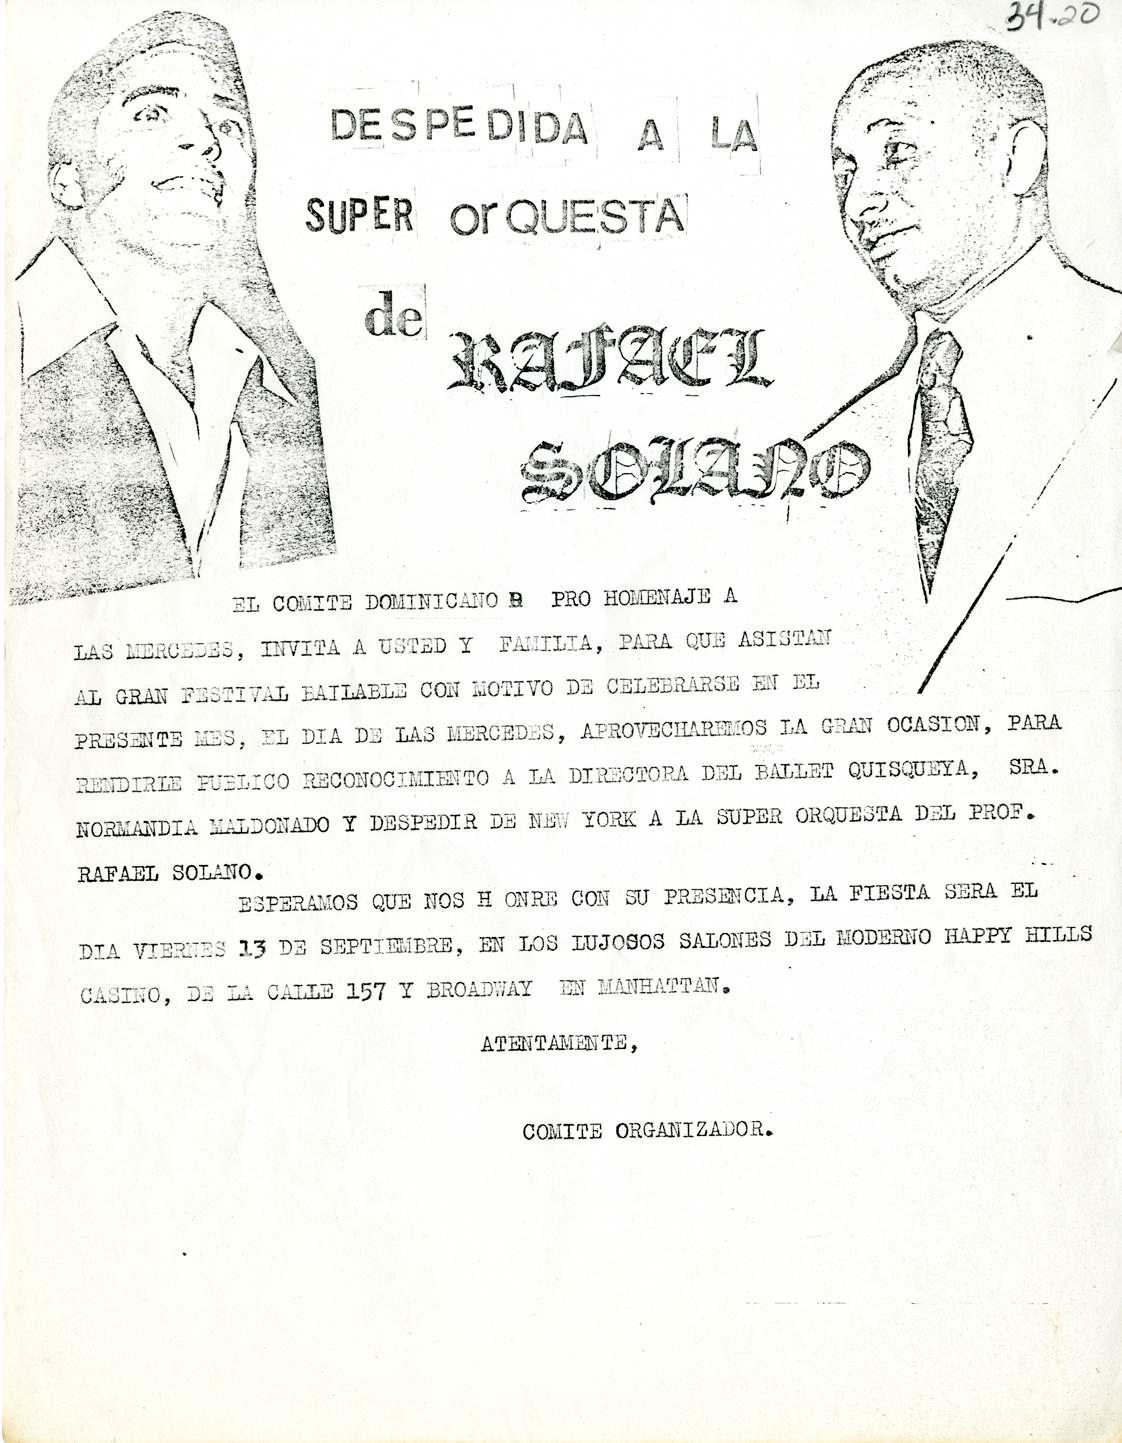 Farewell concert to the Super Orchestra of Rafael Solano Flyer, September 13, ca. 1970s